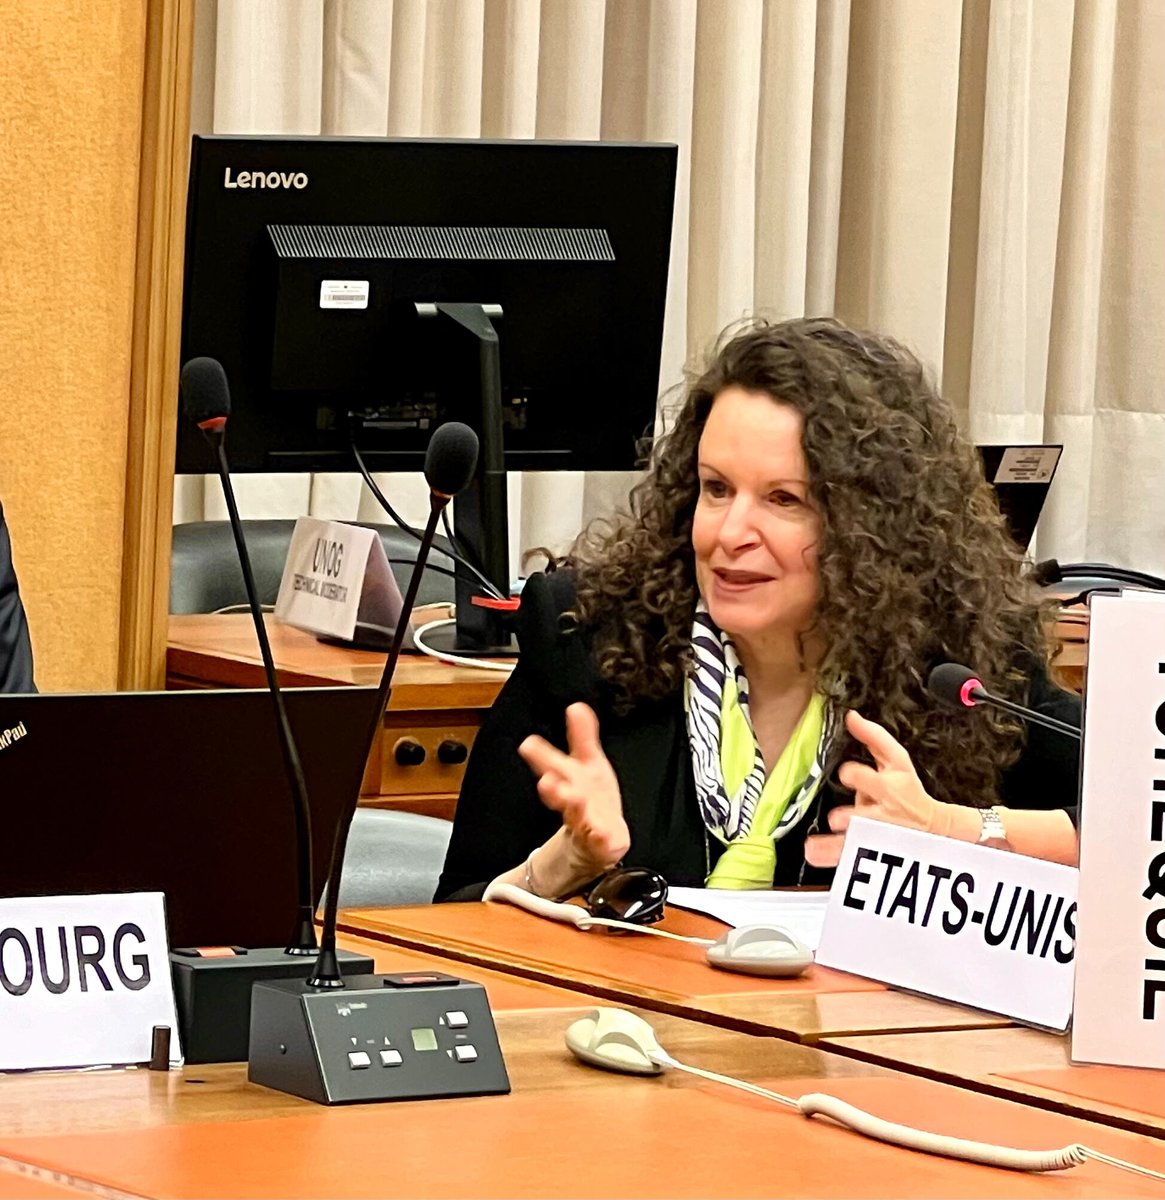 The 🇺🇸 was proud to support the #HRC55 side event organized by @NLinGeneva and @FO_Coalition on the importance of mainstreaming human rights throughout the #GlobalDigitalCompact. The GDC should reaffirm our commitment to respecting human rights online and offline.